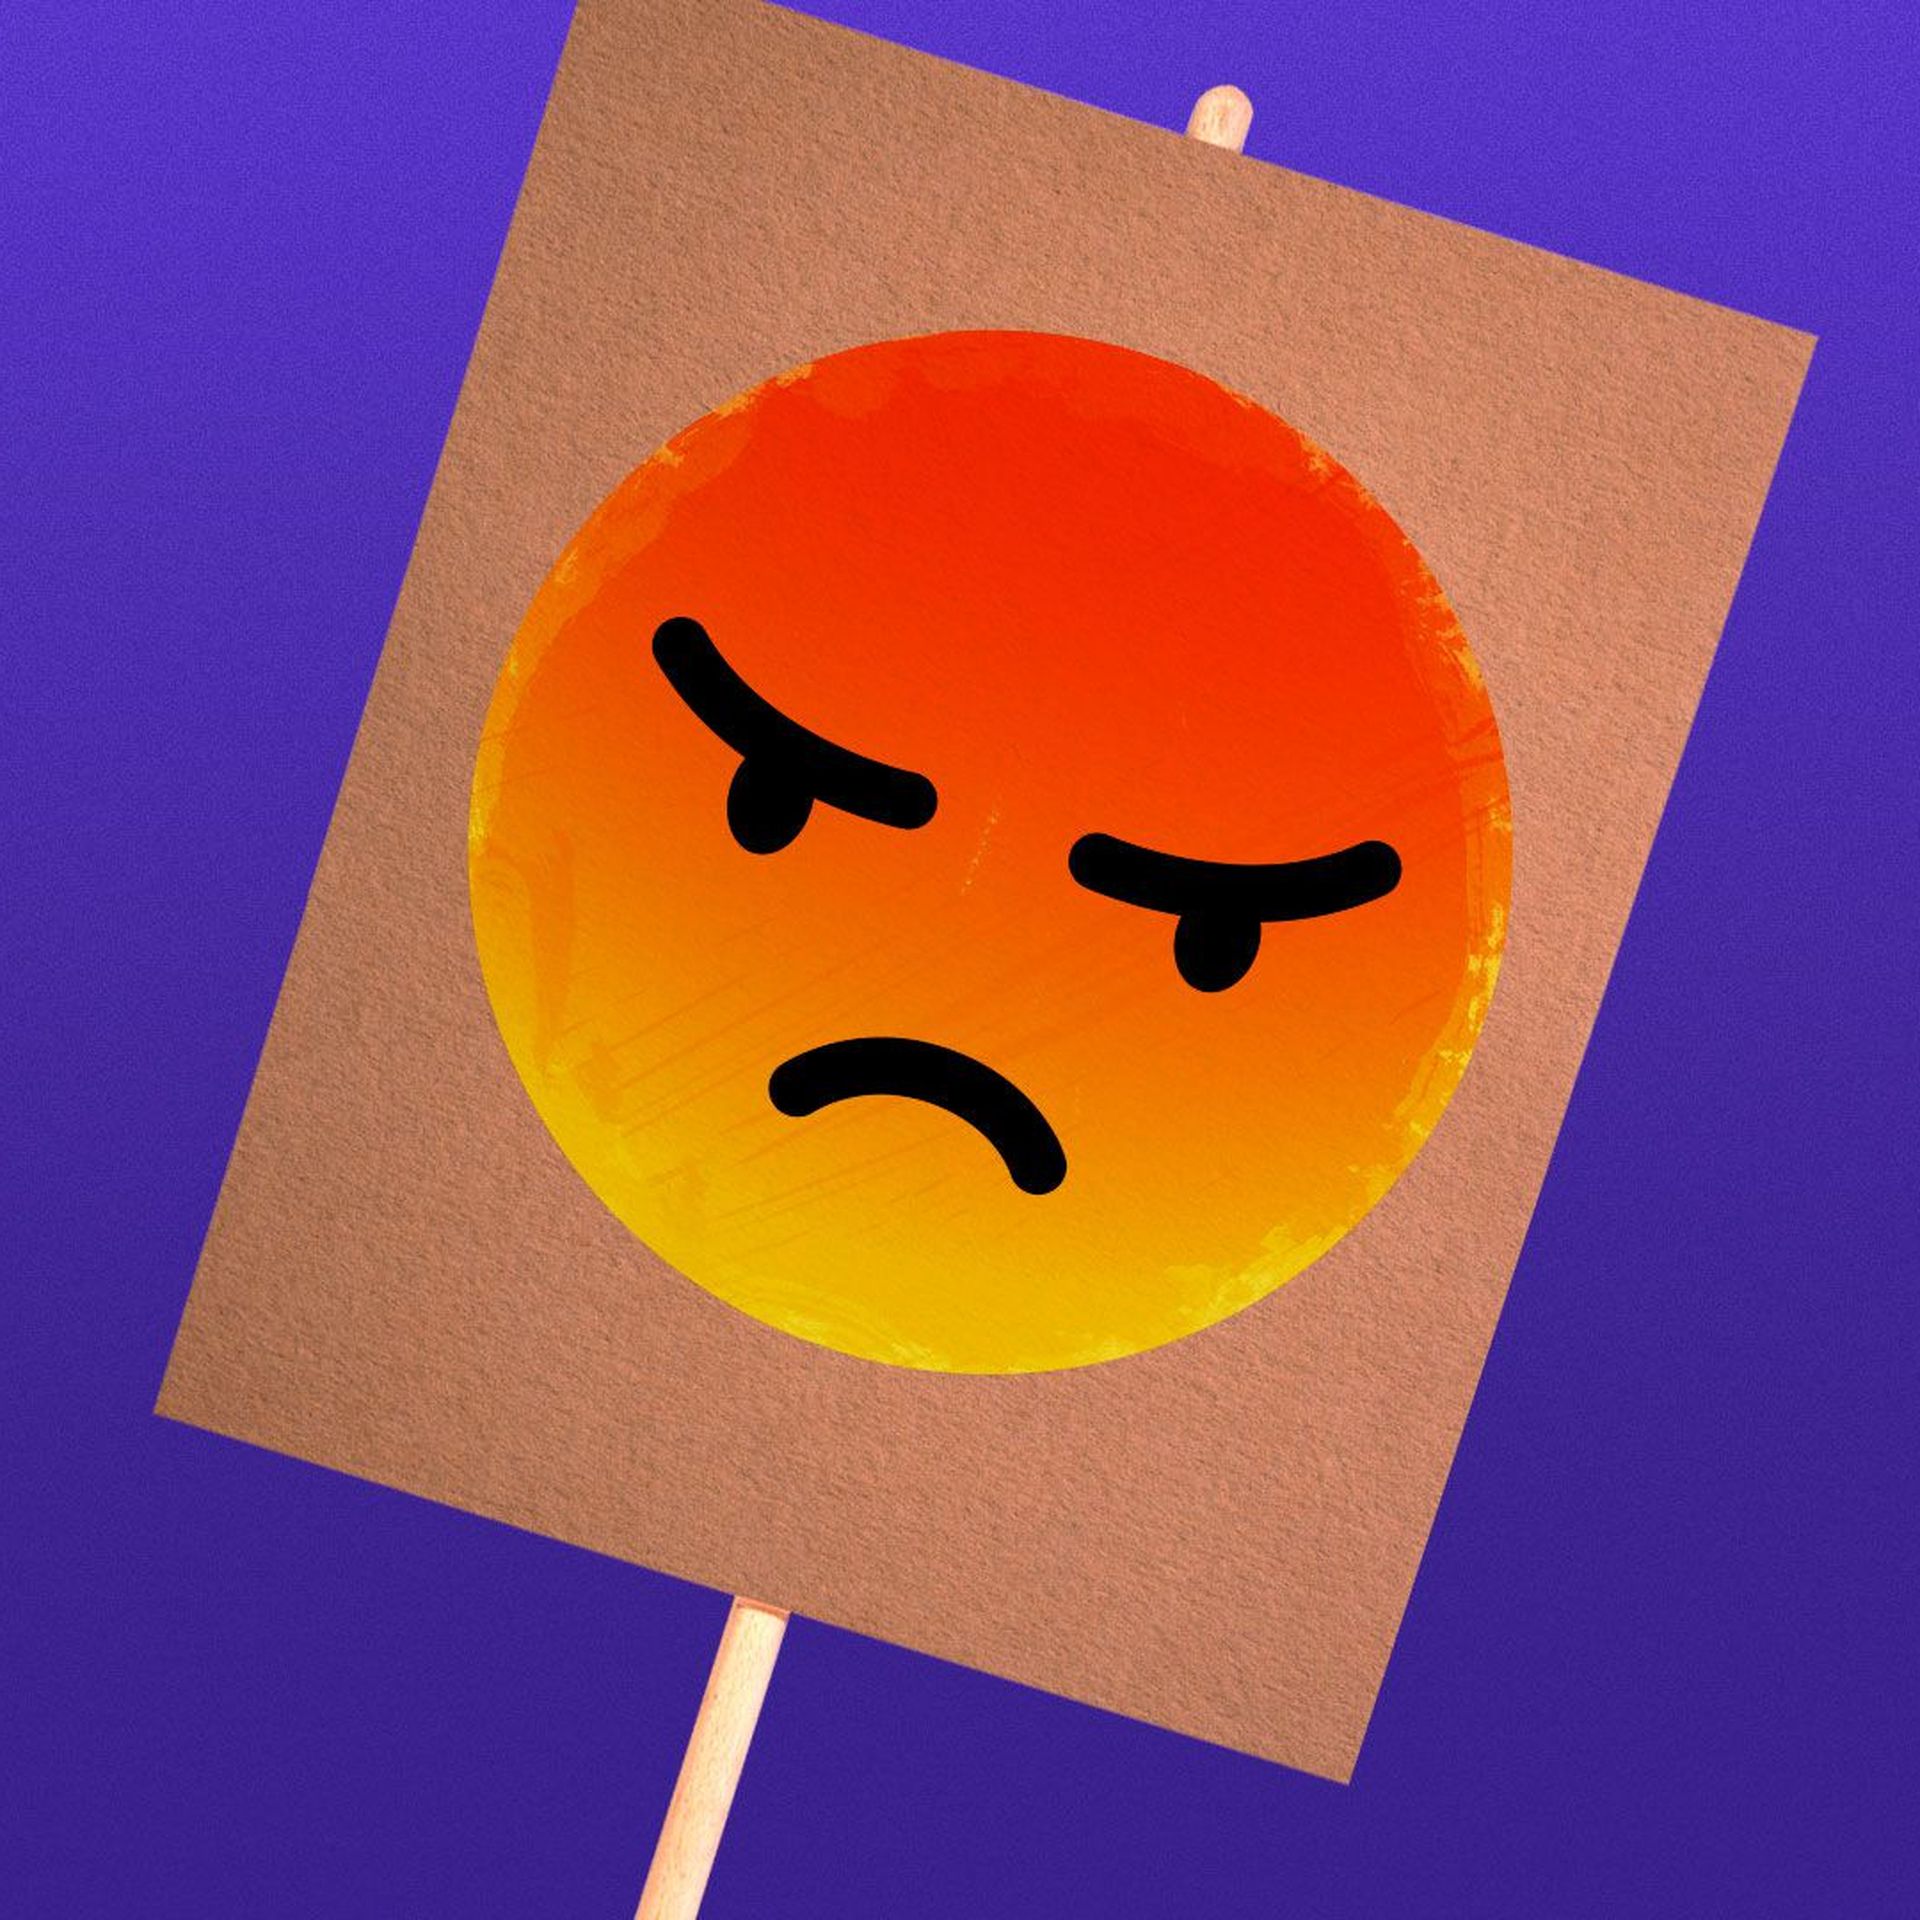 Illustration of protest sign with angry emoji